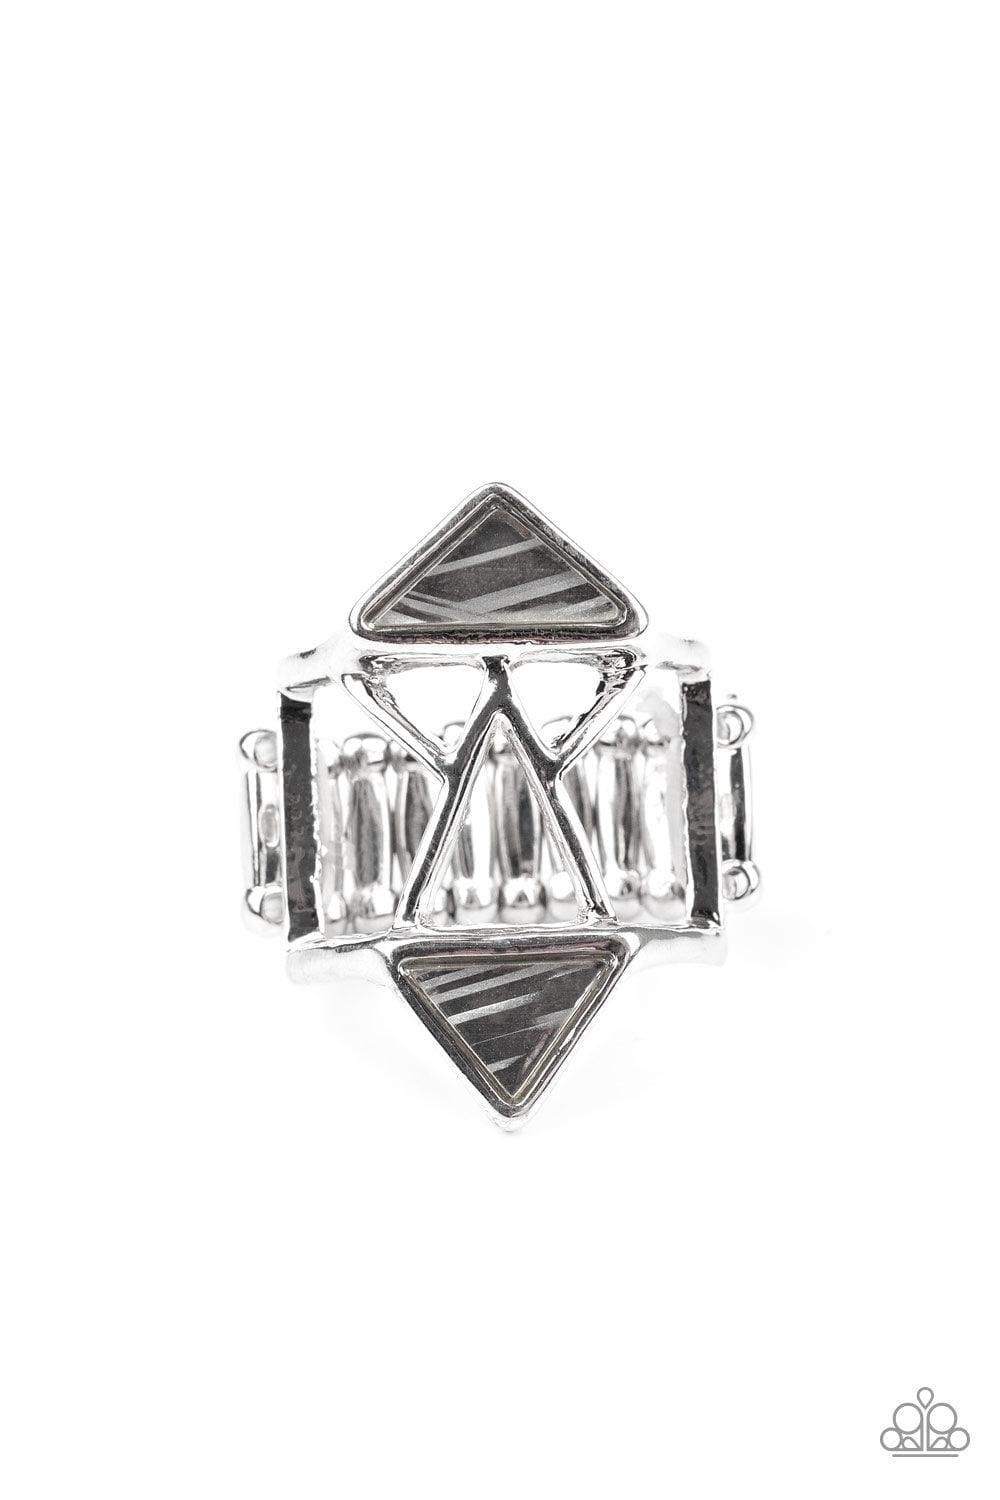 Paparazzi Accessories - Making Me Edgy - Silver Ring - Bling by JessieK